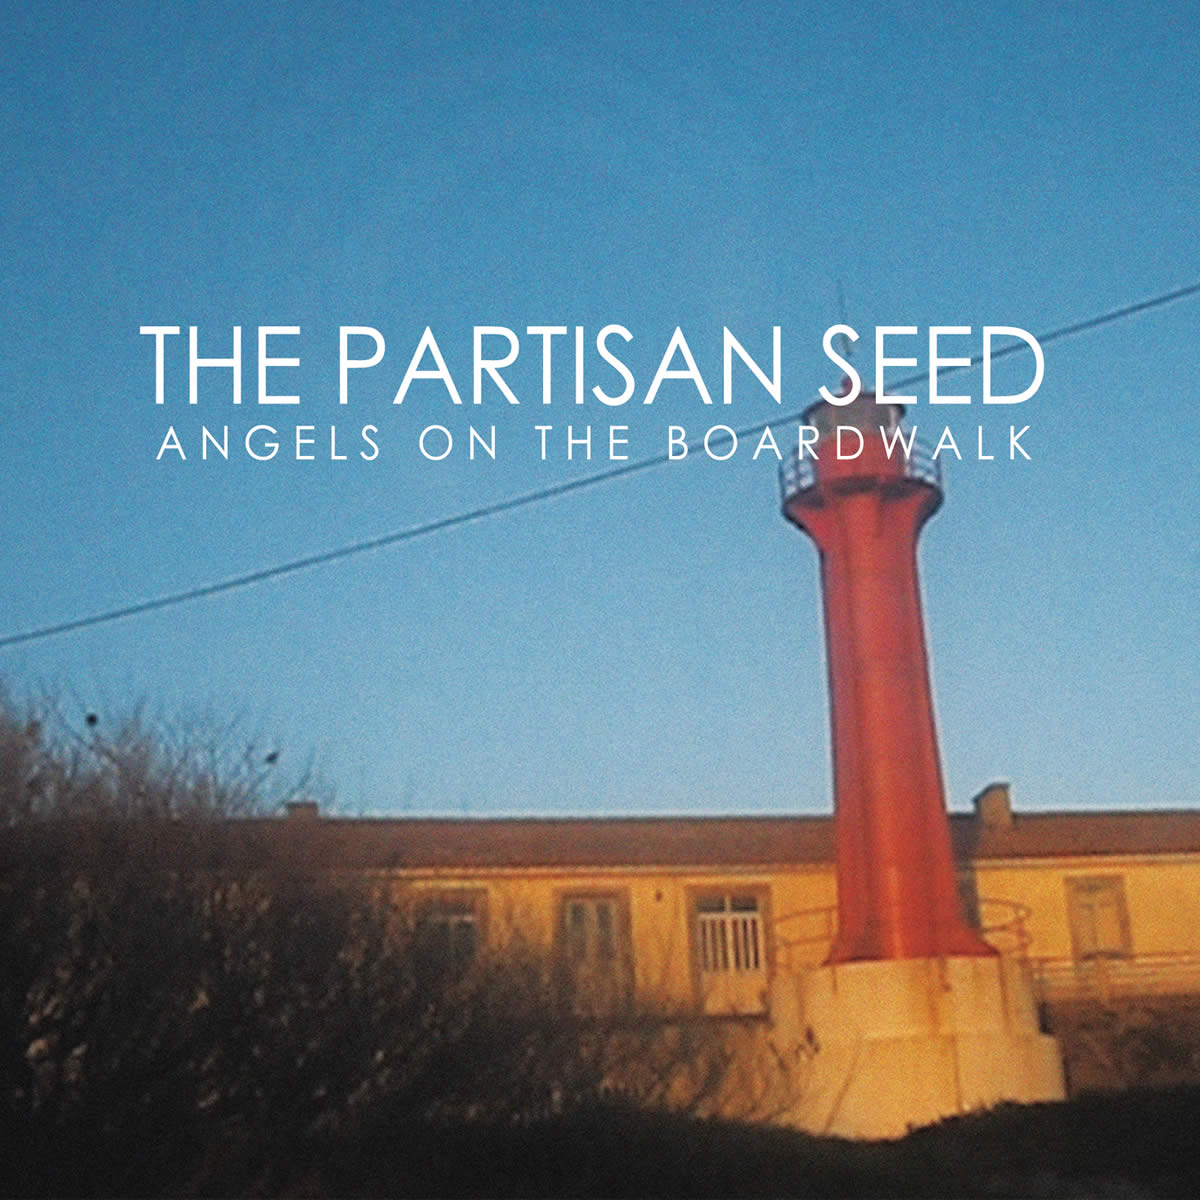 The Partisan Seed  e “Angels On The Boardwalk”